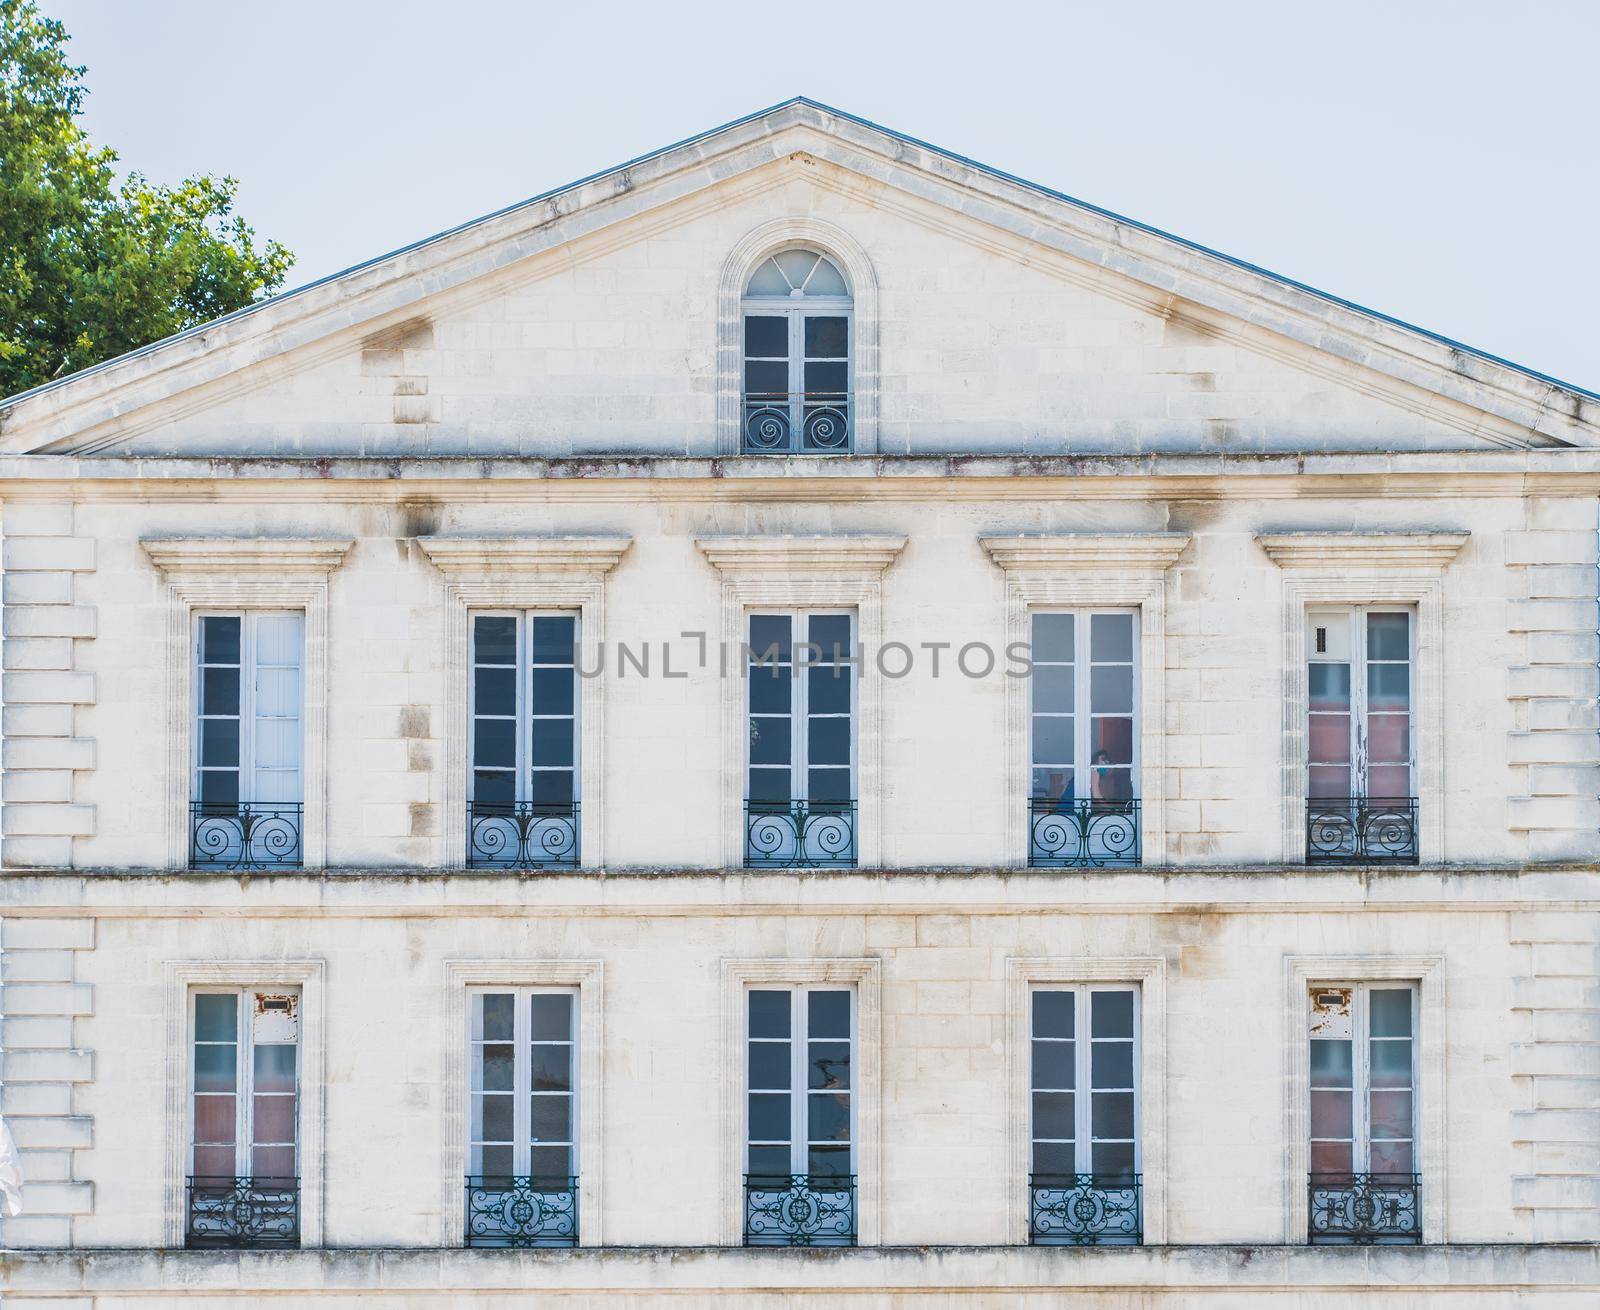 Architectural building with windows and railings o Rochefort in France